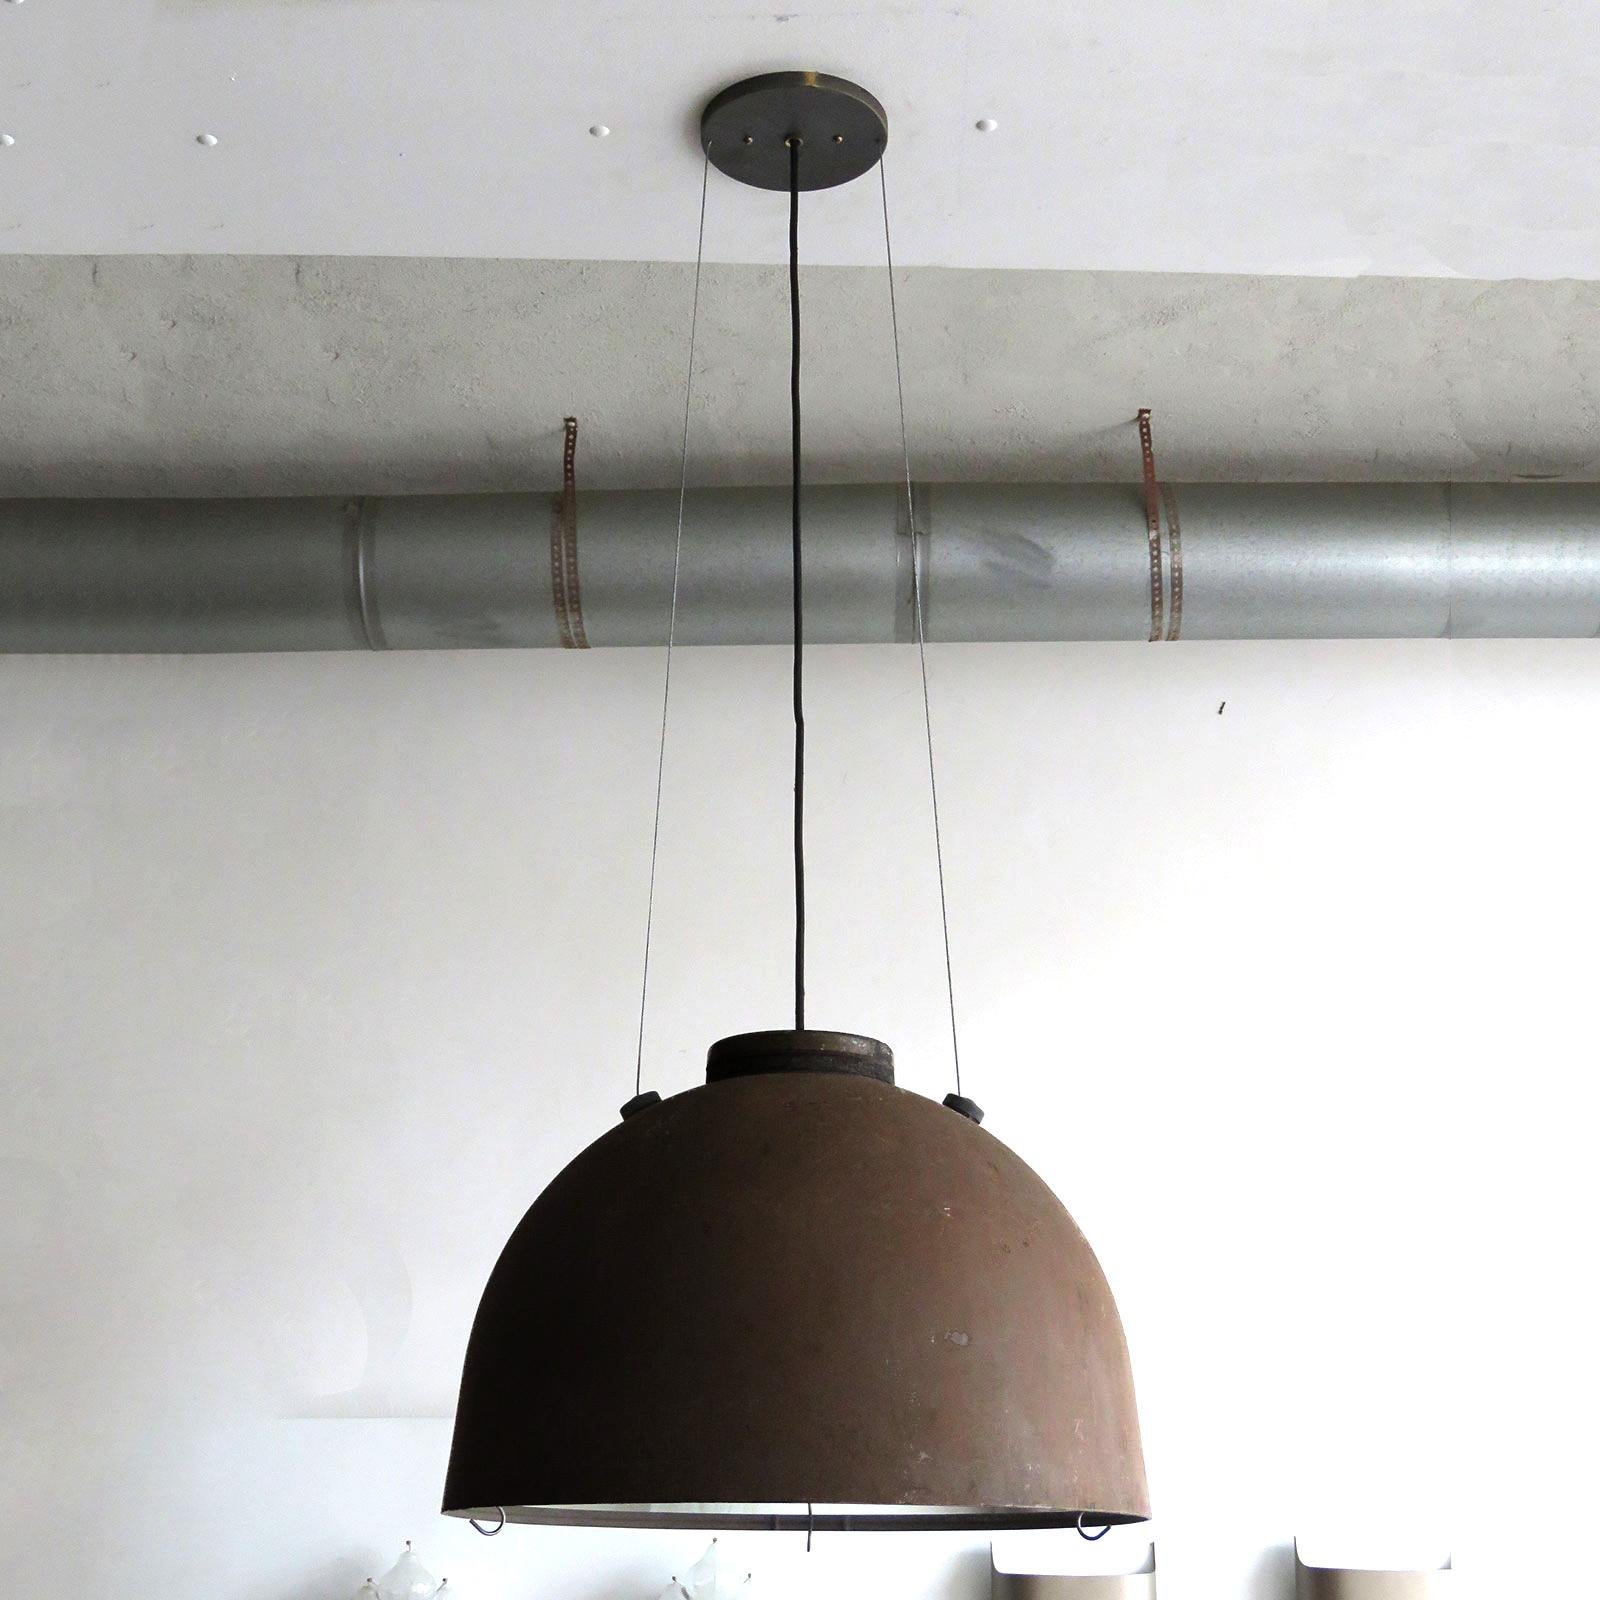 Large-scale pendant lights designed by Otto Kaszner, manufactured by Philips Denmark in the 1970s for the streets in Copenhagen, Denmark, patinated fiberglass dome with glass cover, suspended from steel cables, total height can be customized